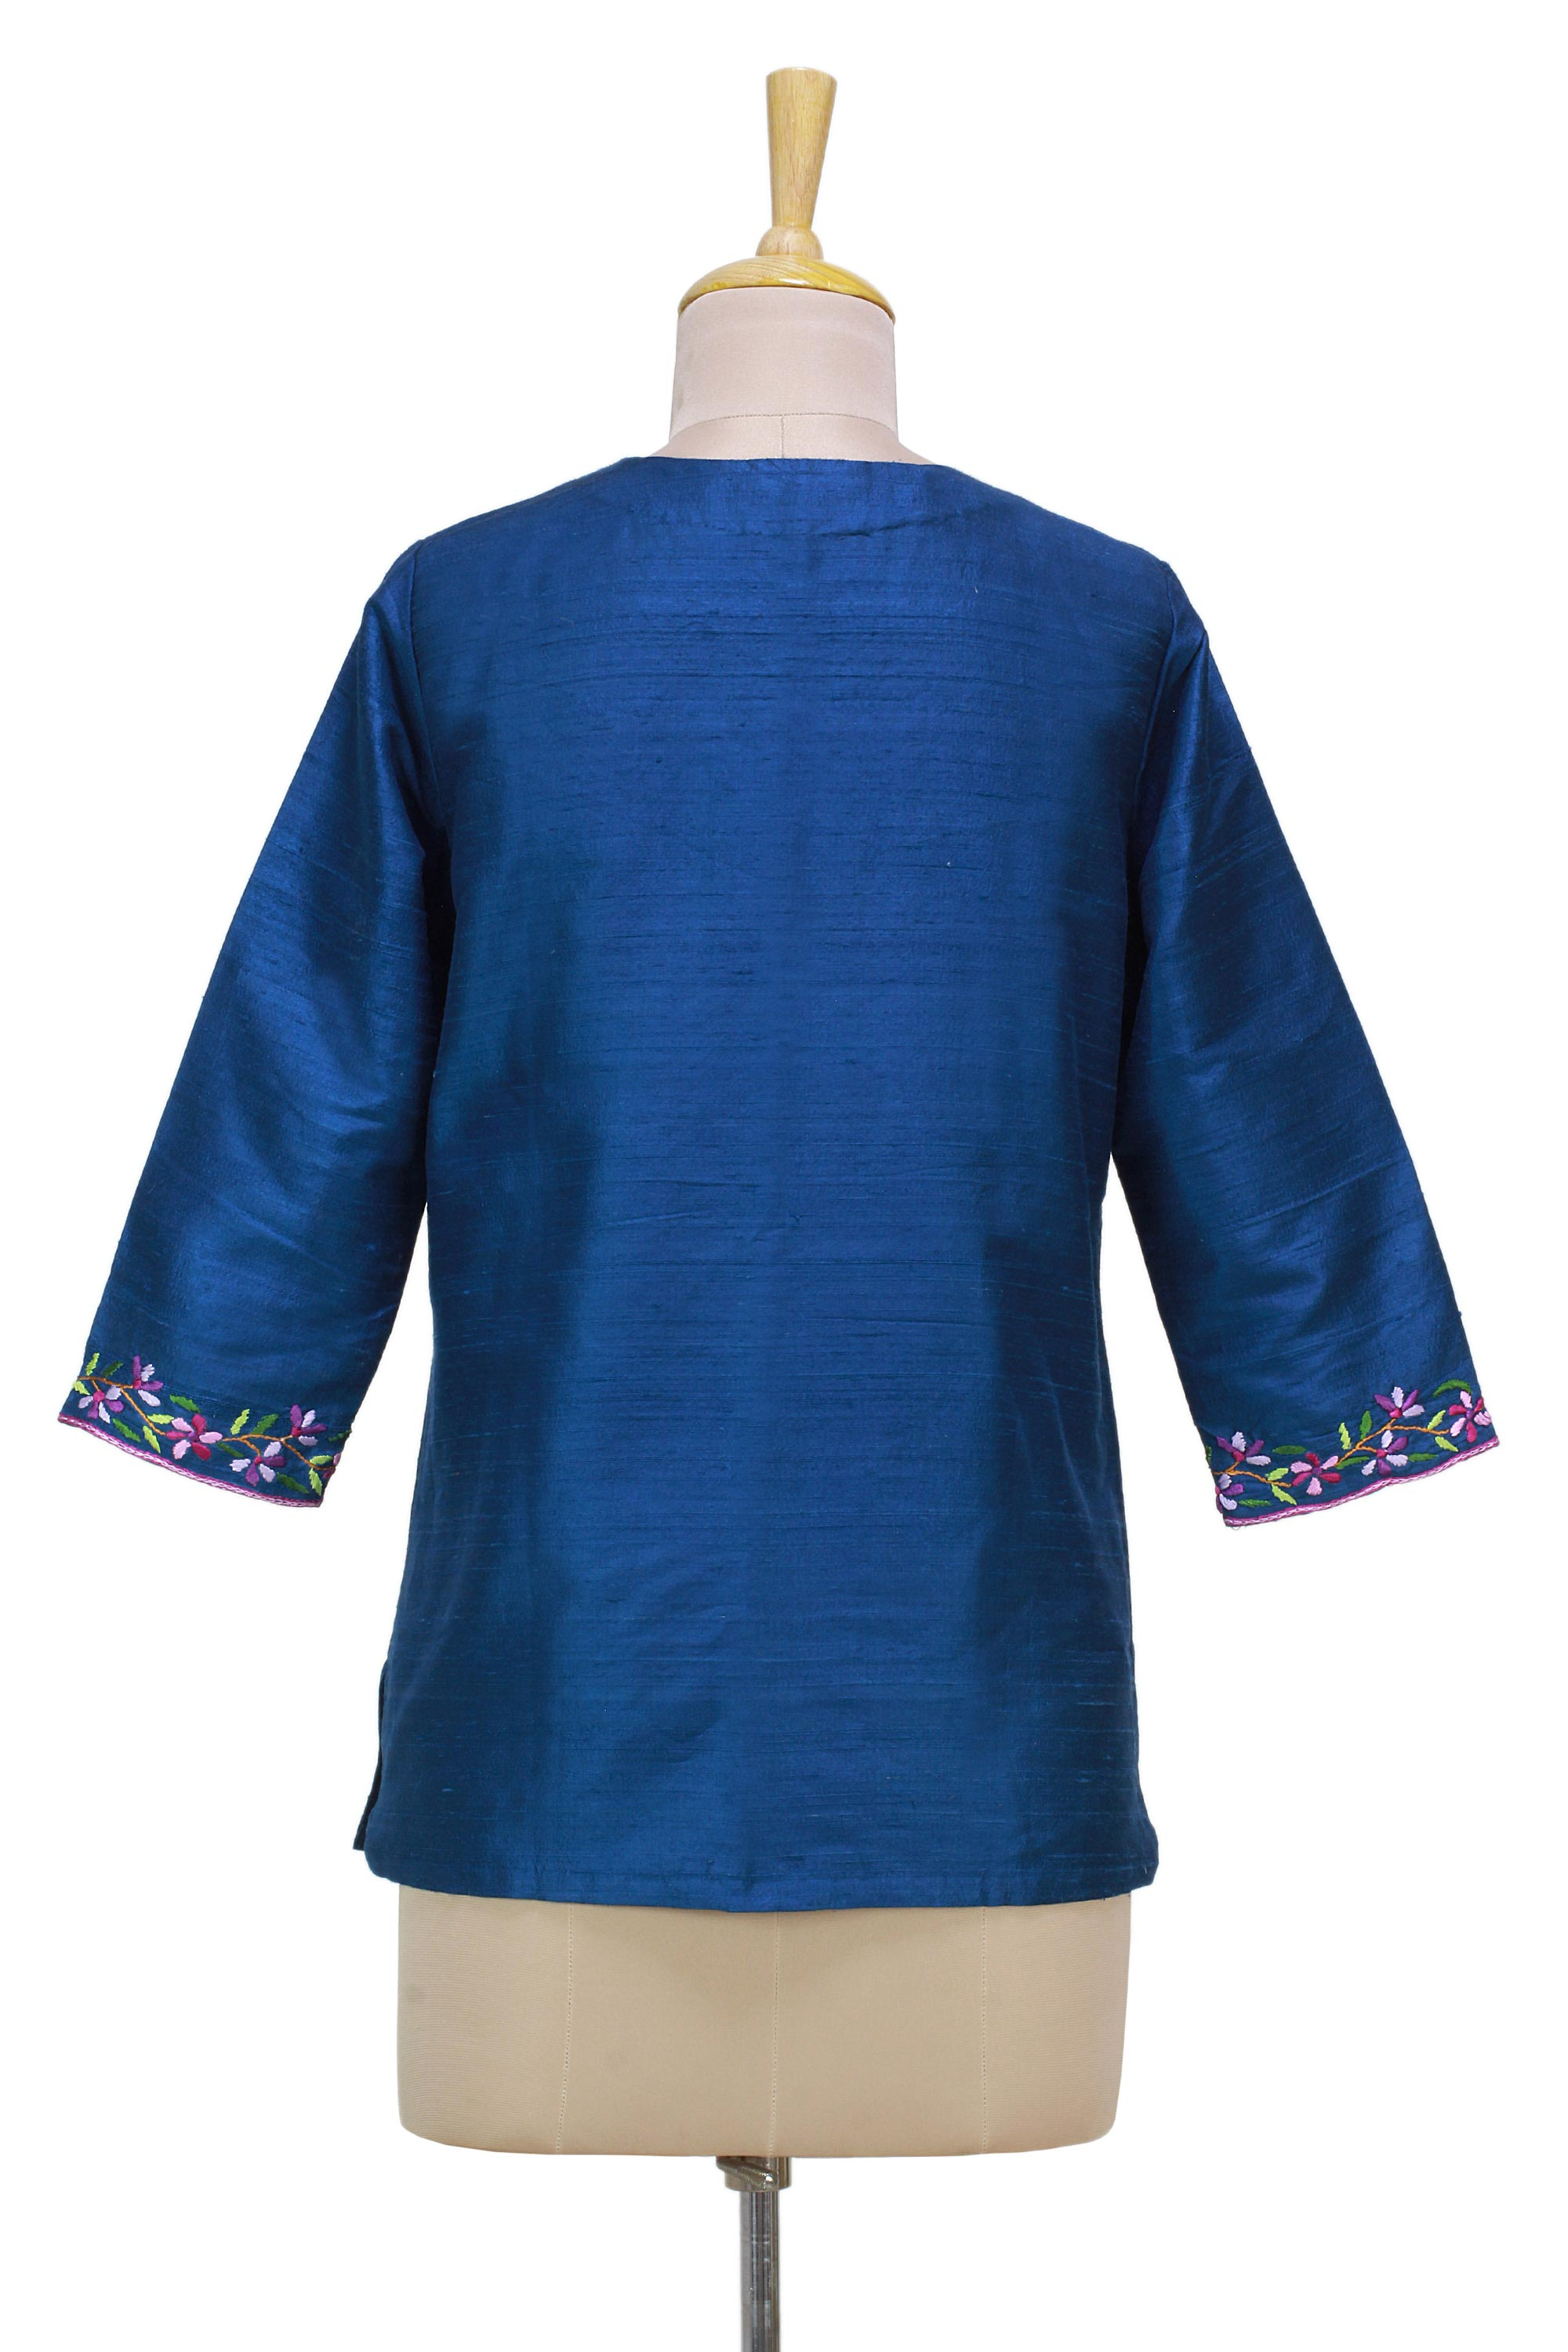 Hand Embroidered Handwoven Blue Silk Tunic from India - Silk Allure ...